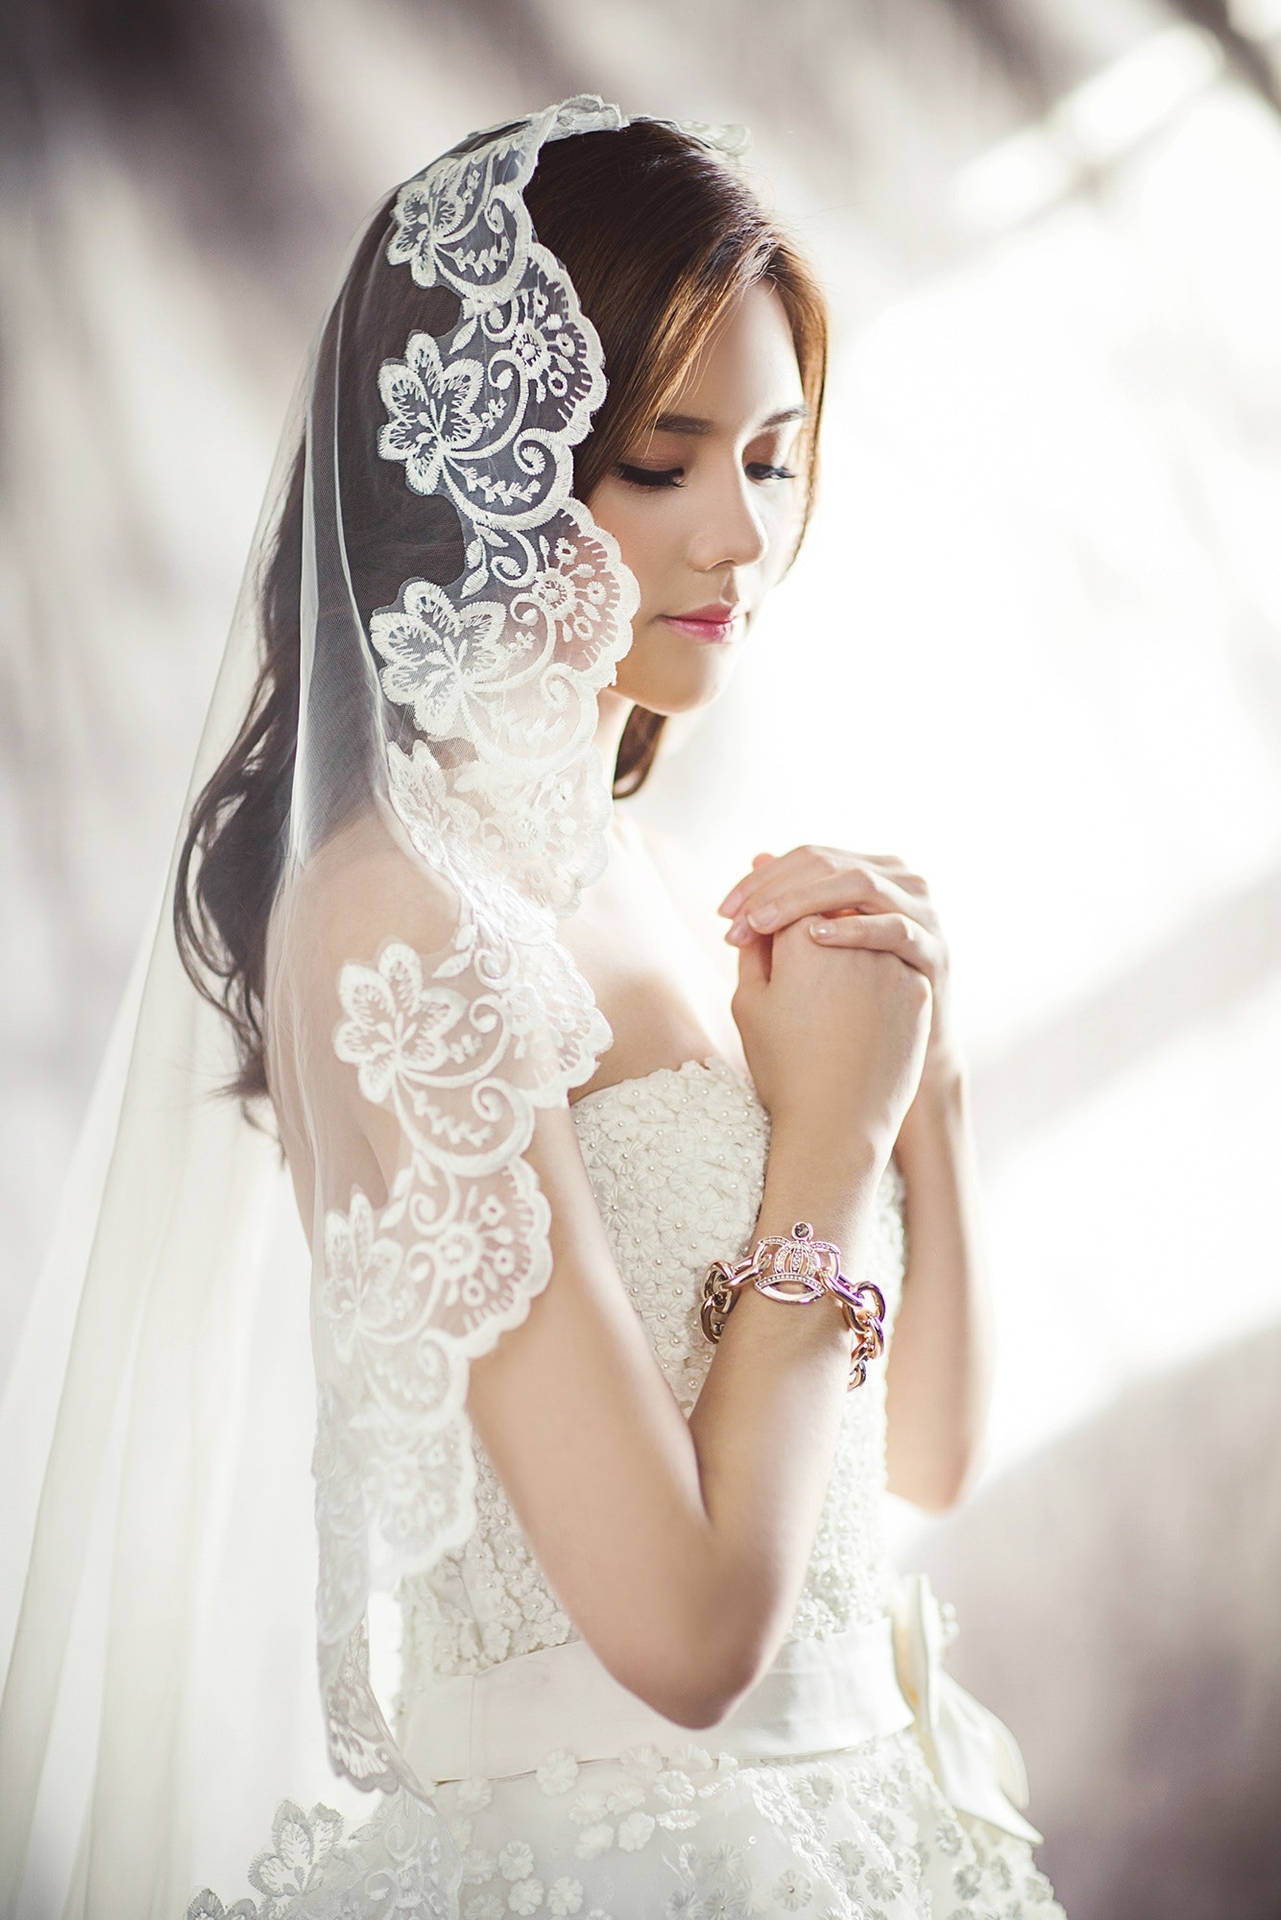 Beautiful Girls Wedding Gown And Veil Background